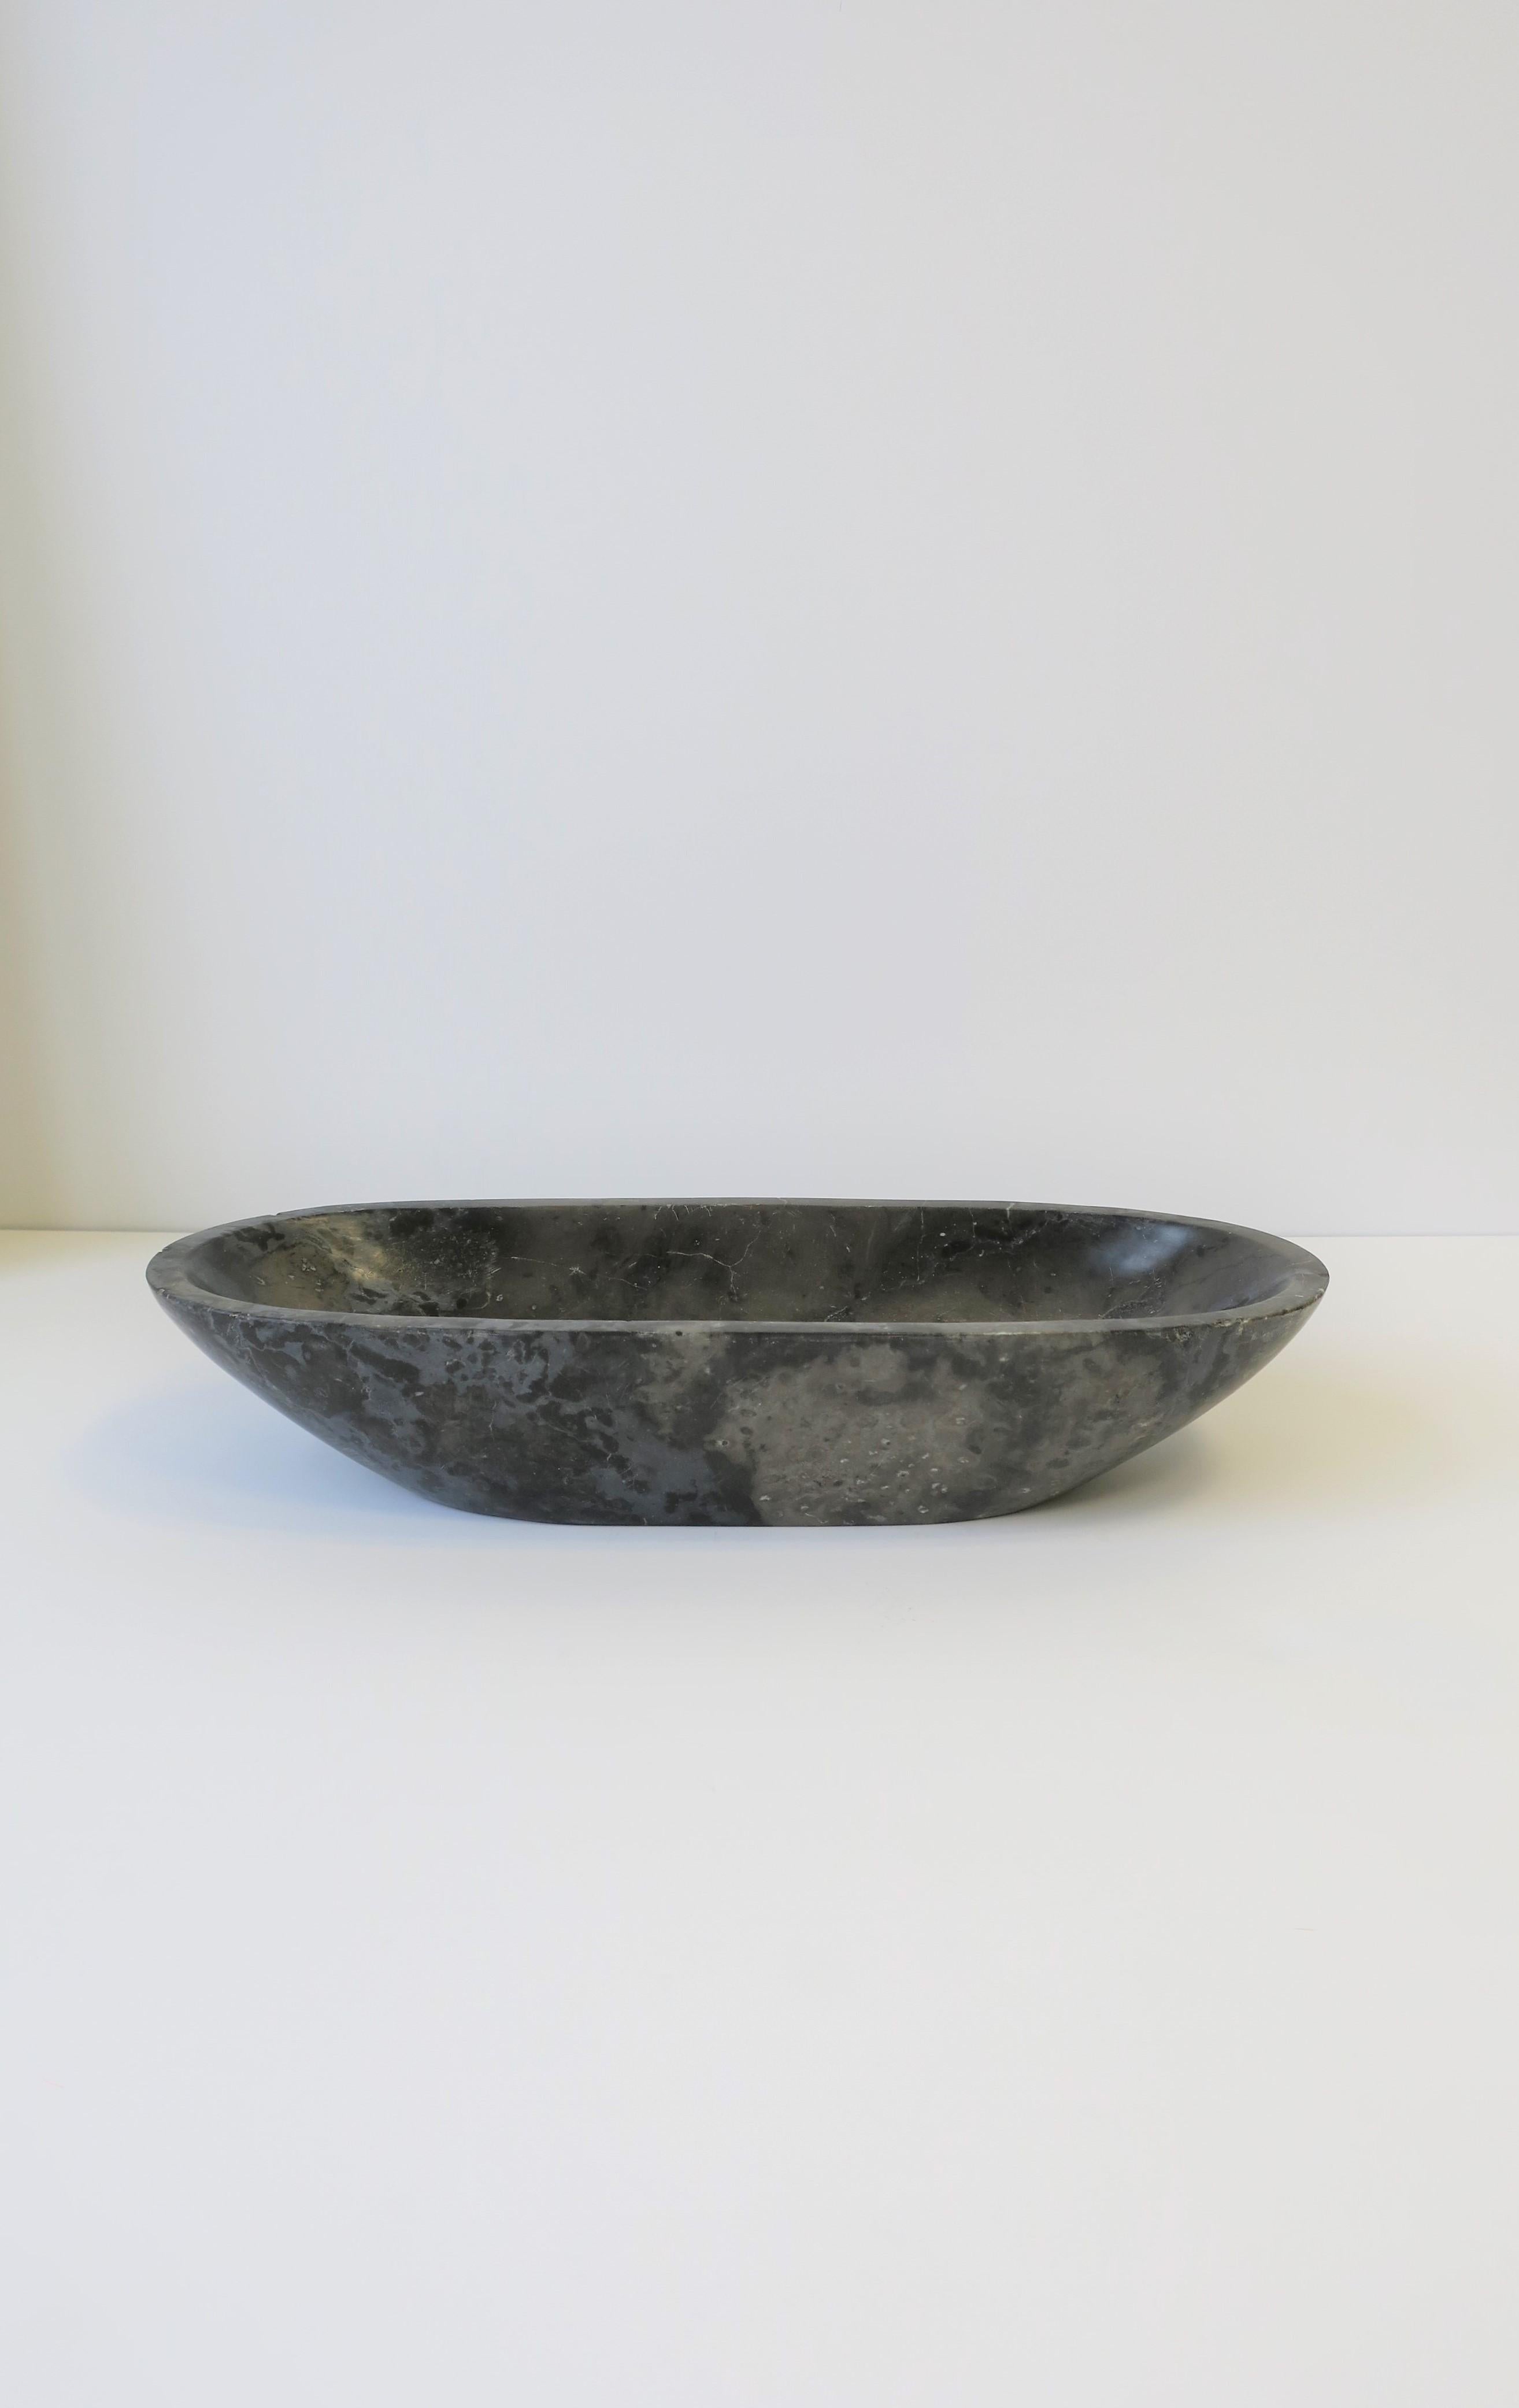 A substantial blue or grey stone oblong bowl or vide-poche (catch-all) in the Minimalist style. 

Piece measures: 3